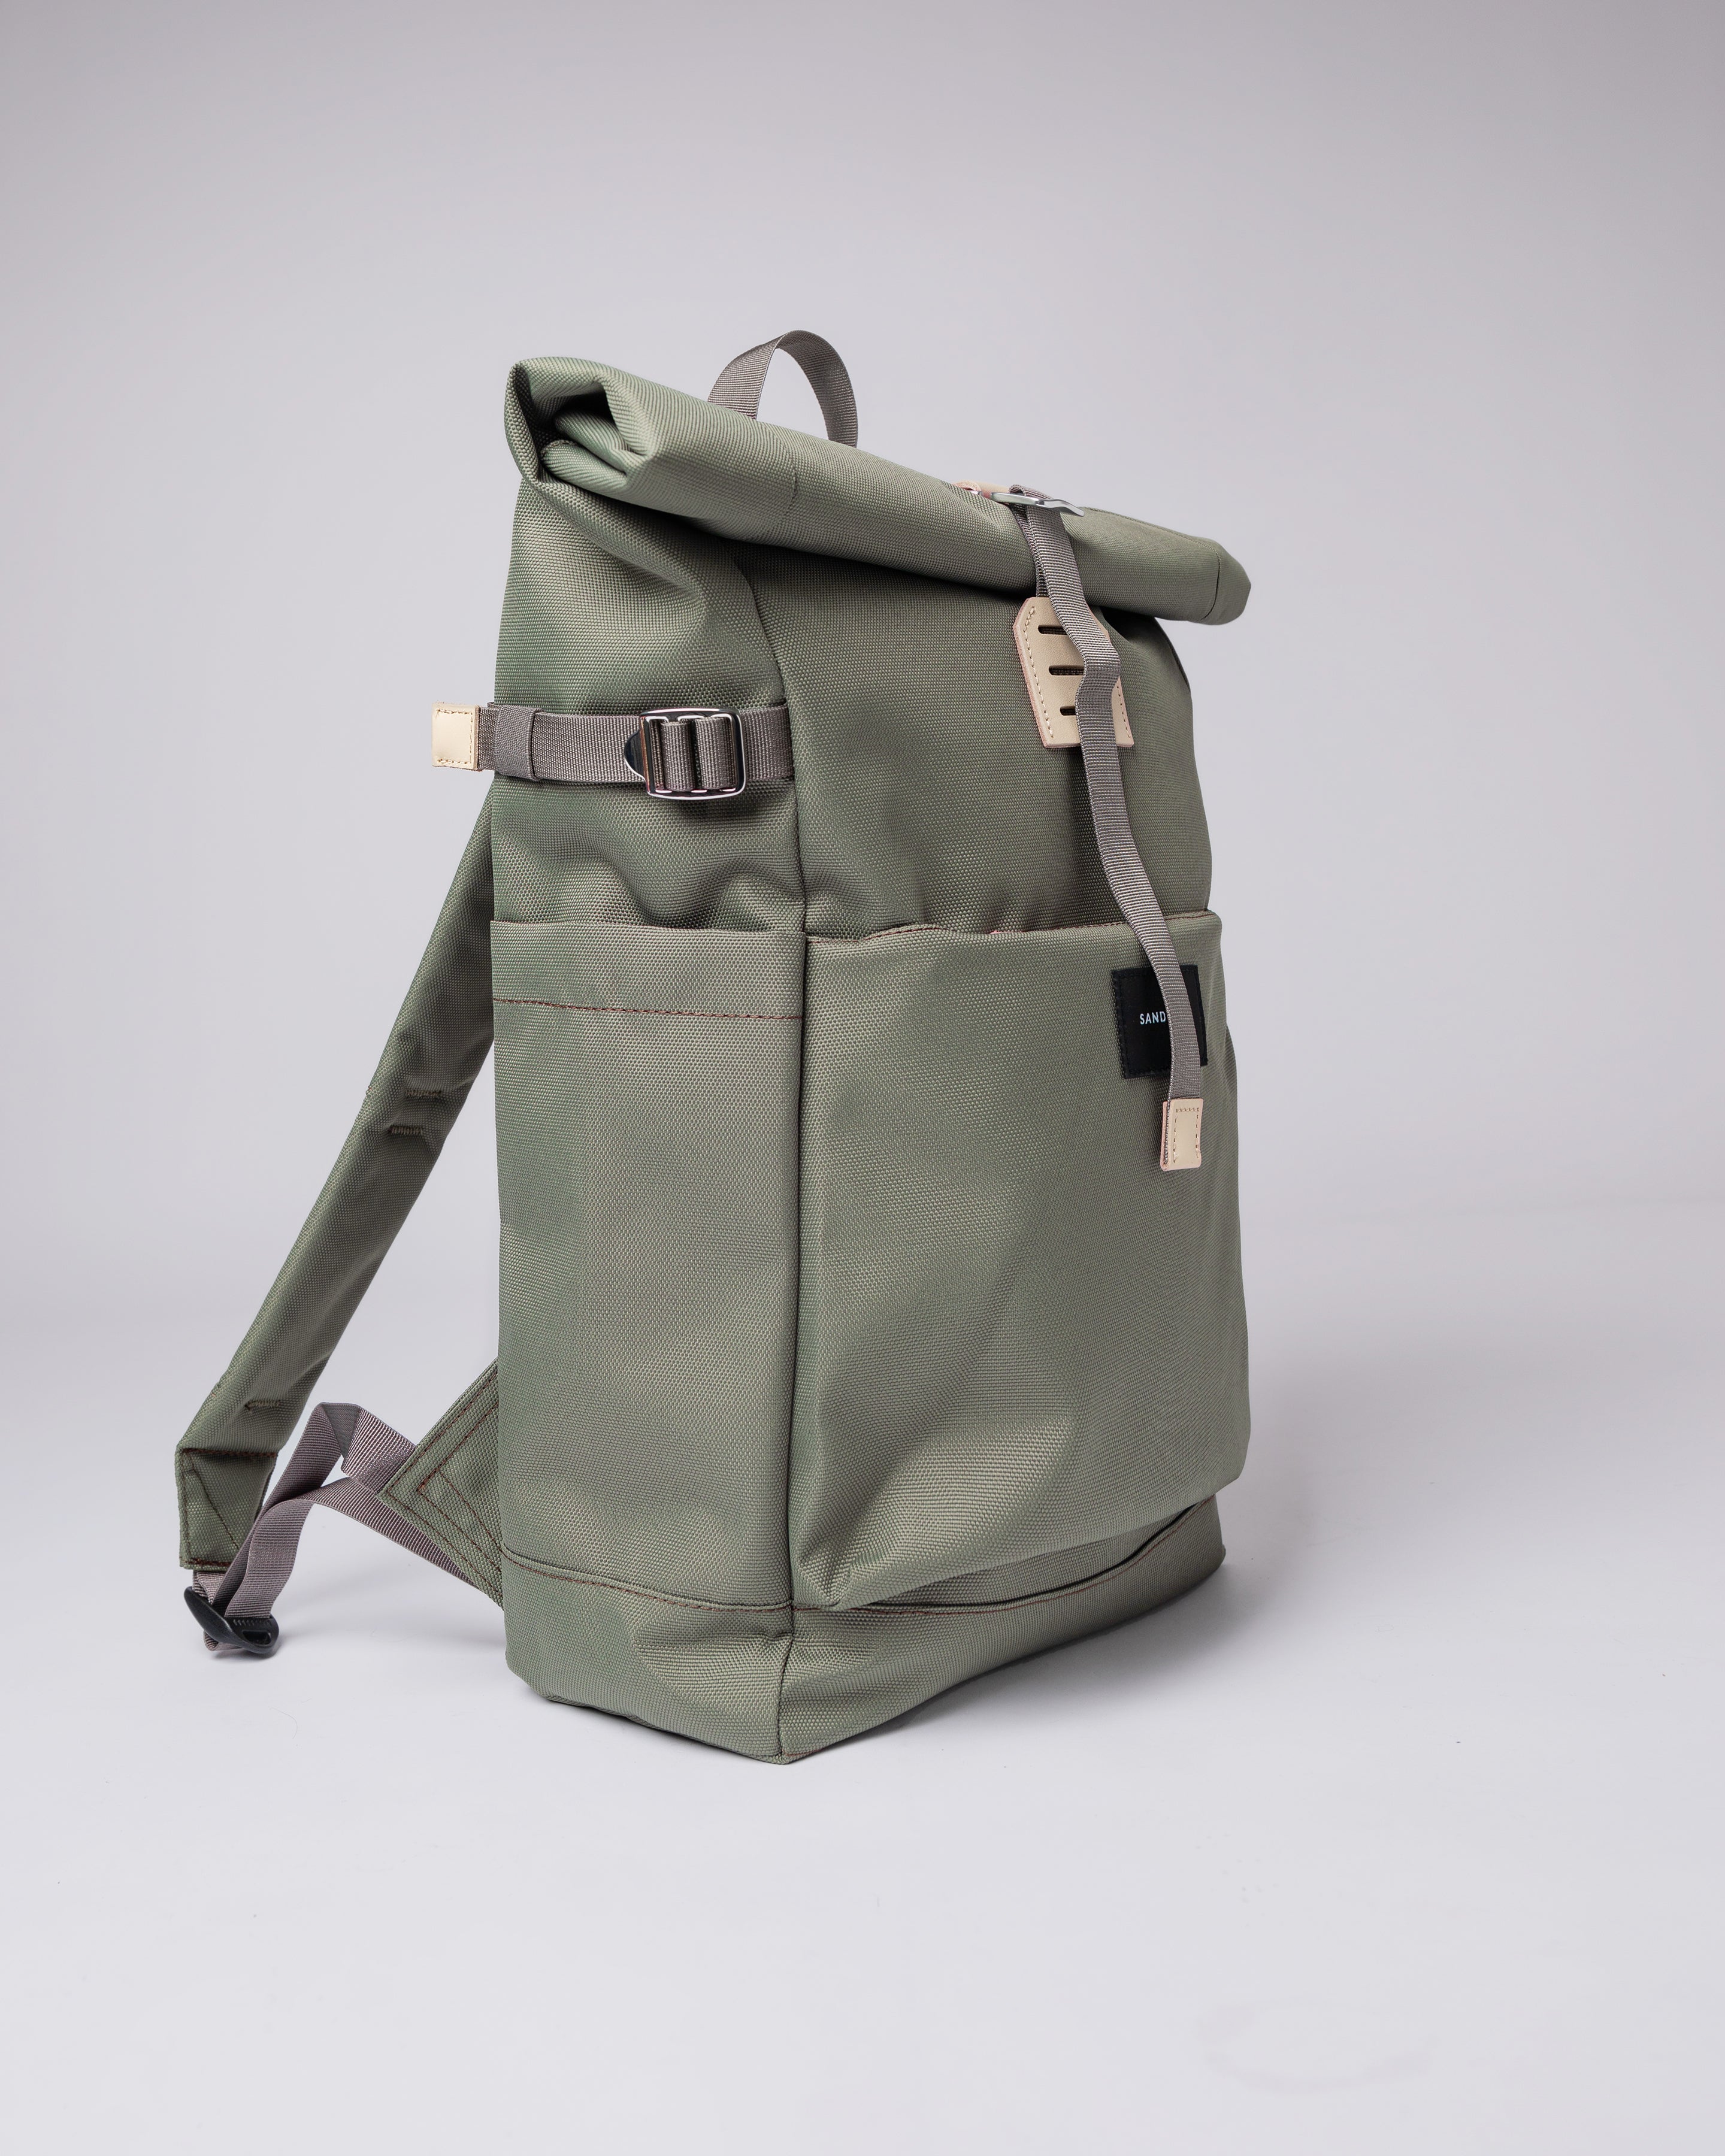 Sandqvist Ilon Backpack in Green SQA2161 | Shop from eightywingold an official brand partner for Sandqvist Canada and US.